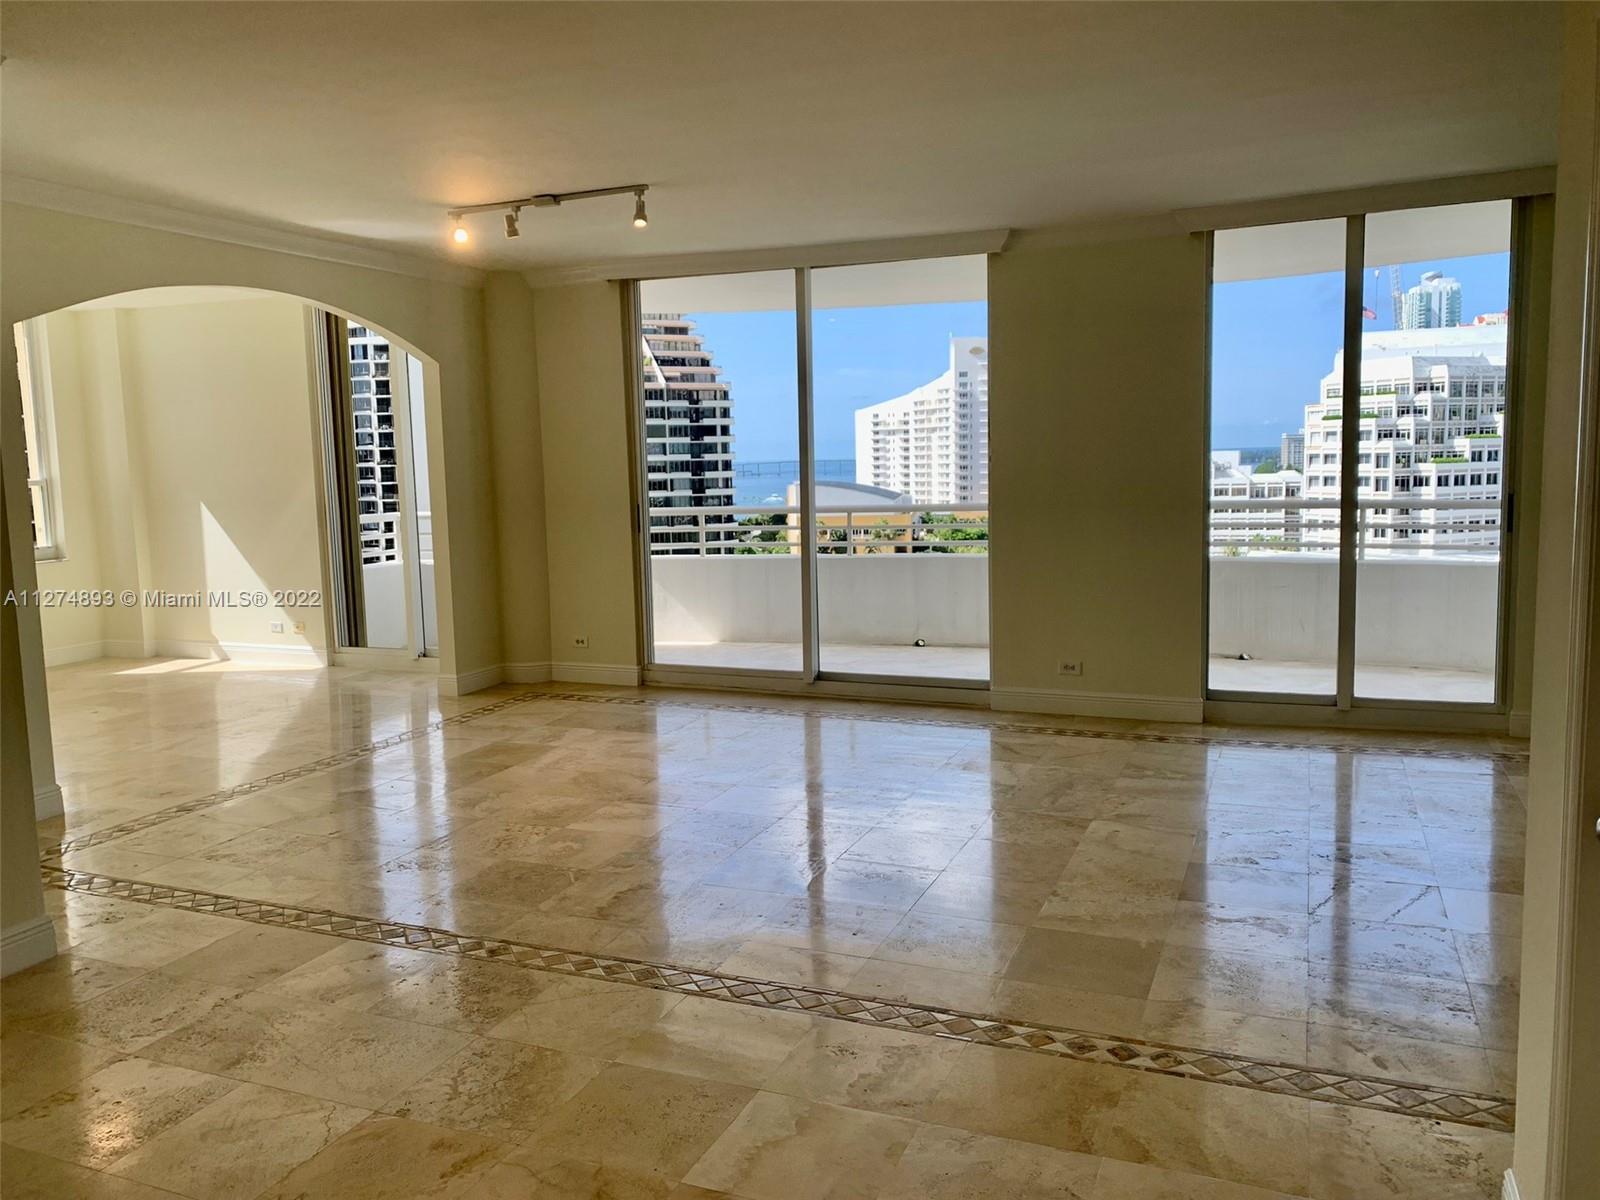 Incredible opportunity to own a large 3 Bedroom 3 Bath unit in Brickell Key, 2,050 Sq. Ft. of interi